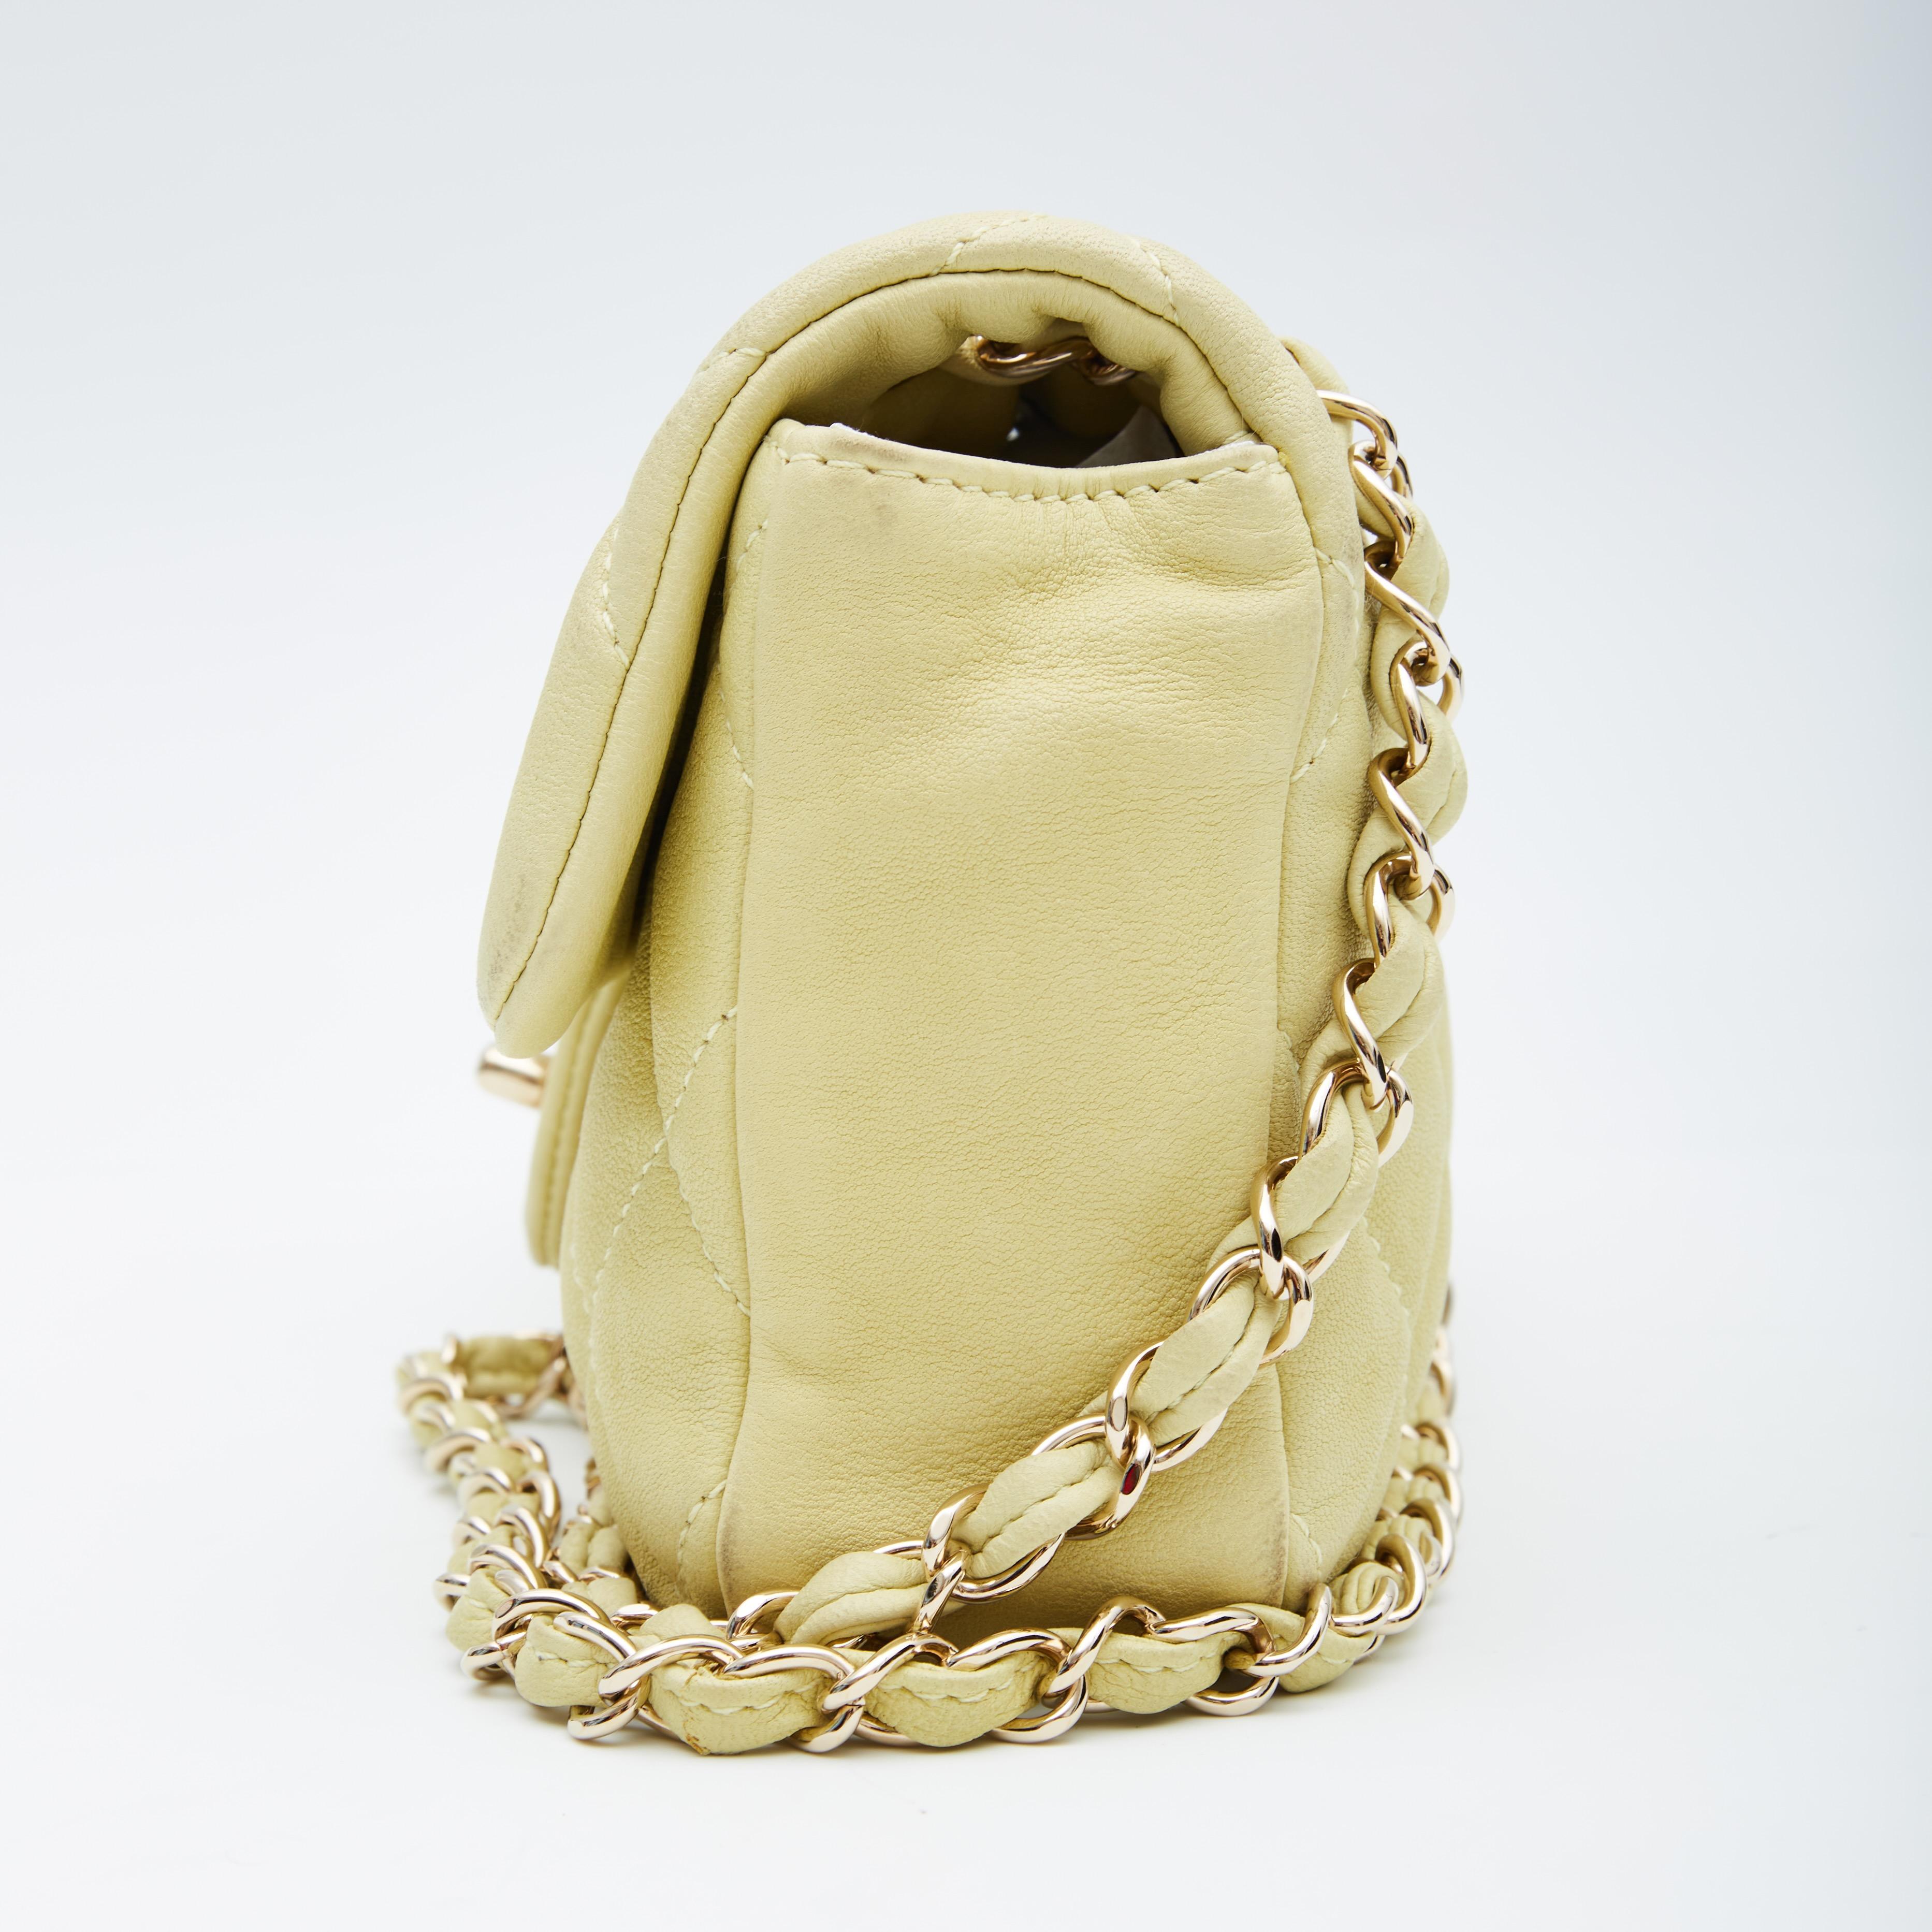 This shoulder bag is made in a luxuriously textured diamond quilted caviar leather in yellow. This The bag features gold toned hardware, a front flap with the interlocking CC turn lock closure, a gold toned chain interlaced with leather shoulder